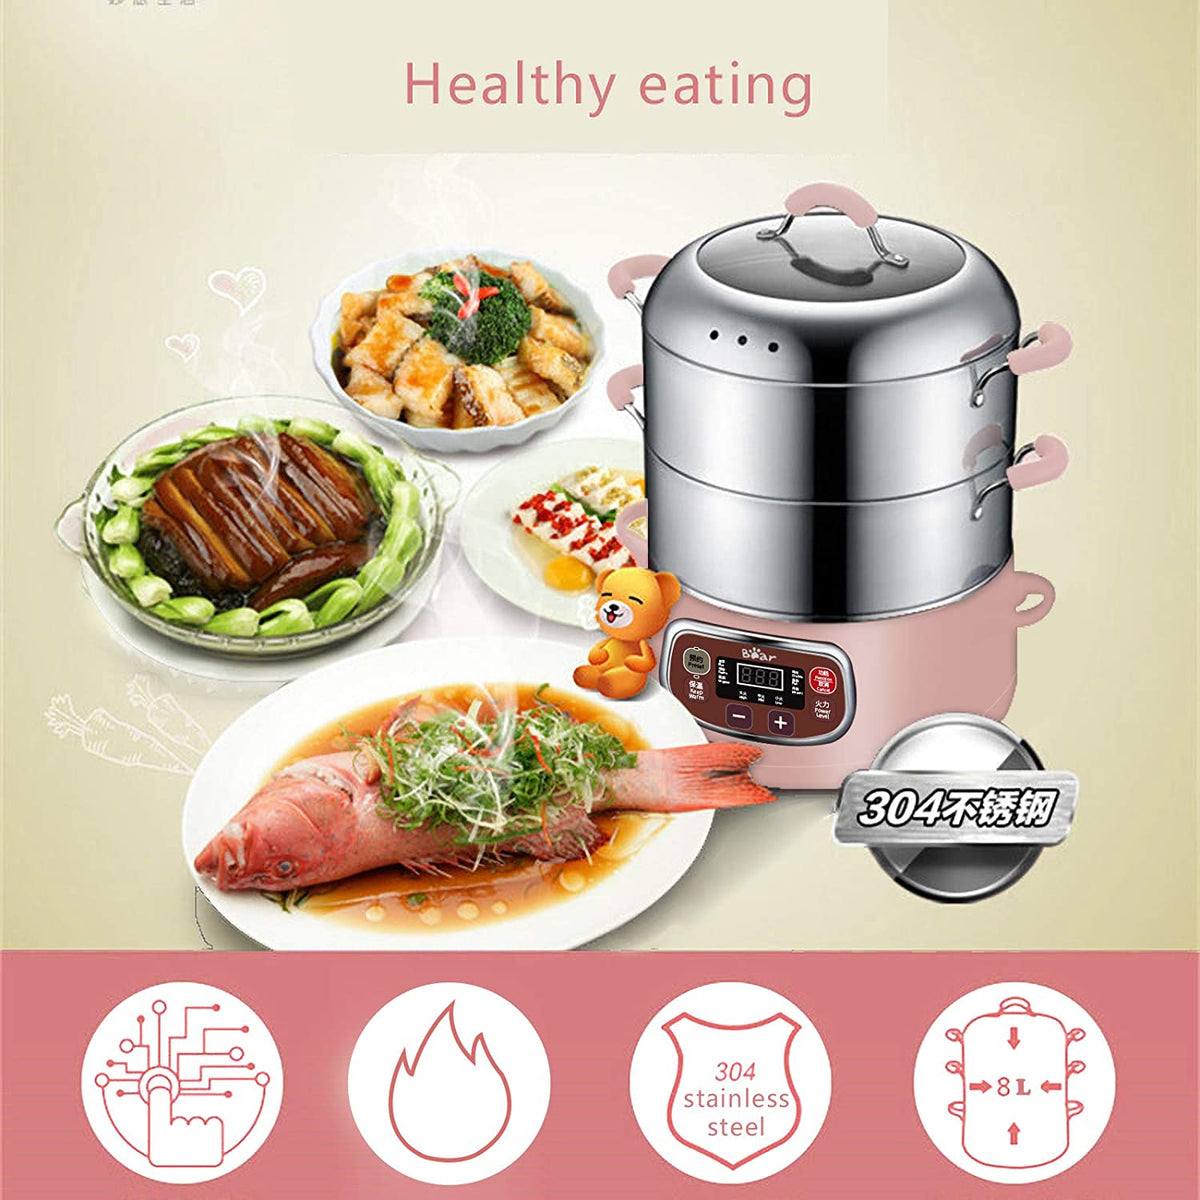 Bear Electric Food Steamer, DZG-A80A2, Stainless Steel Digital